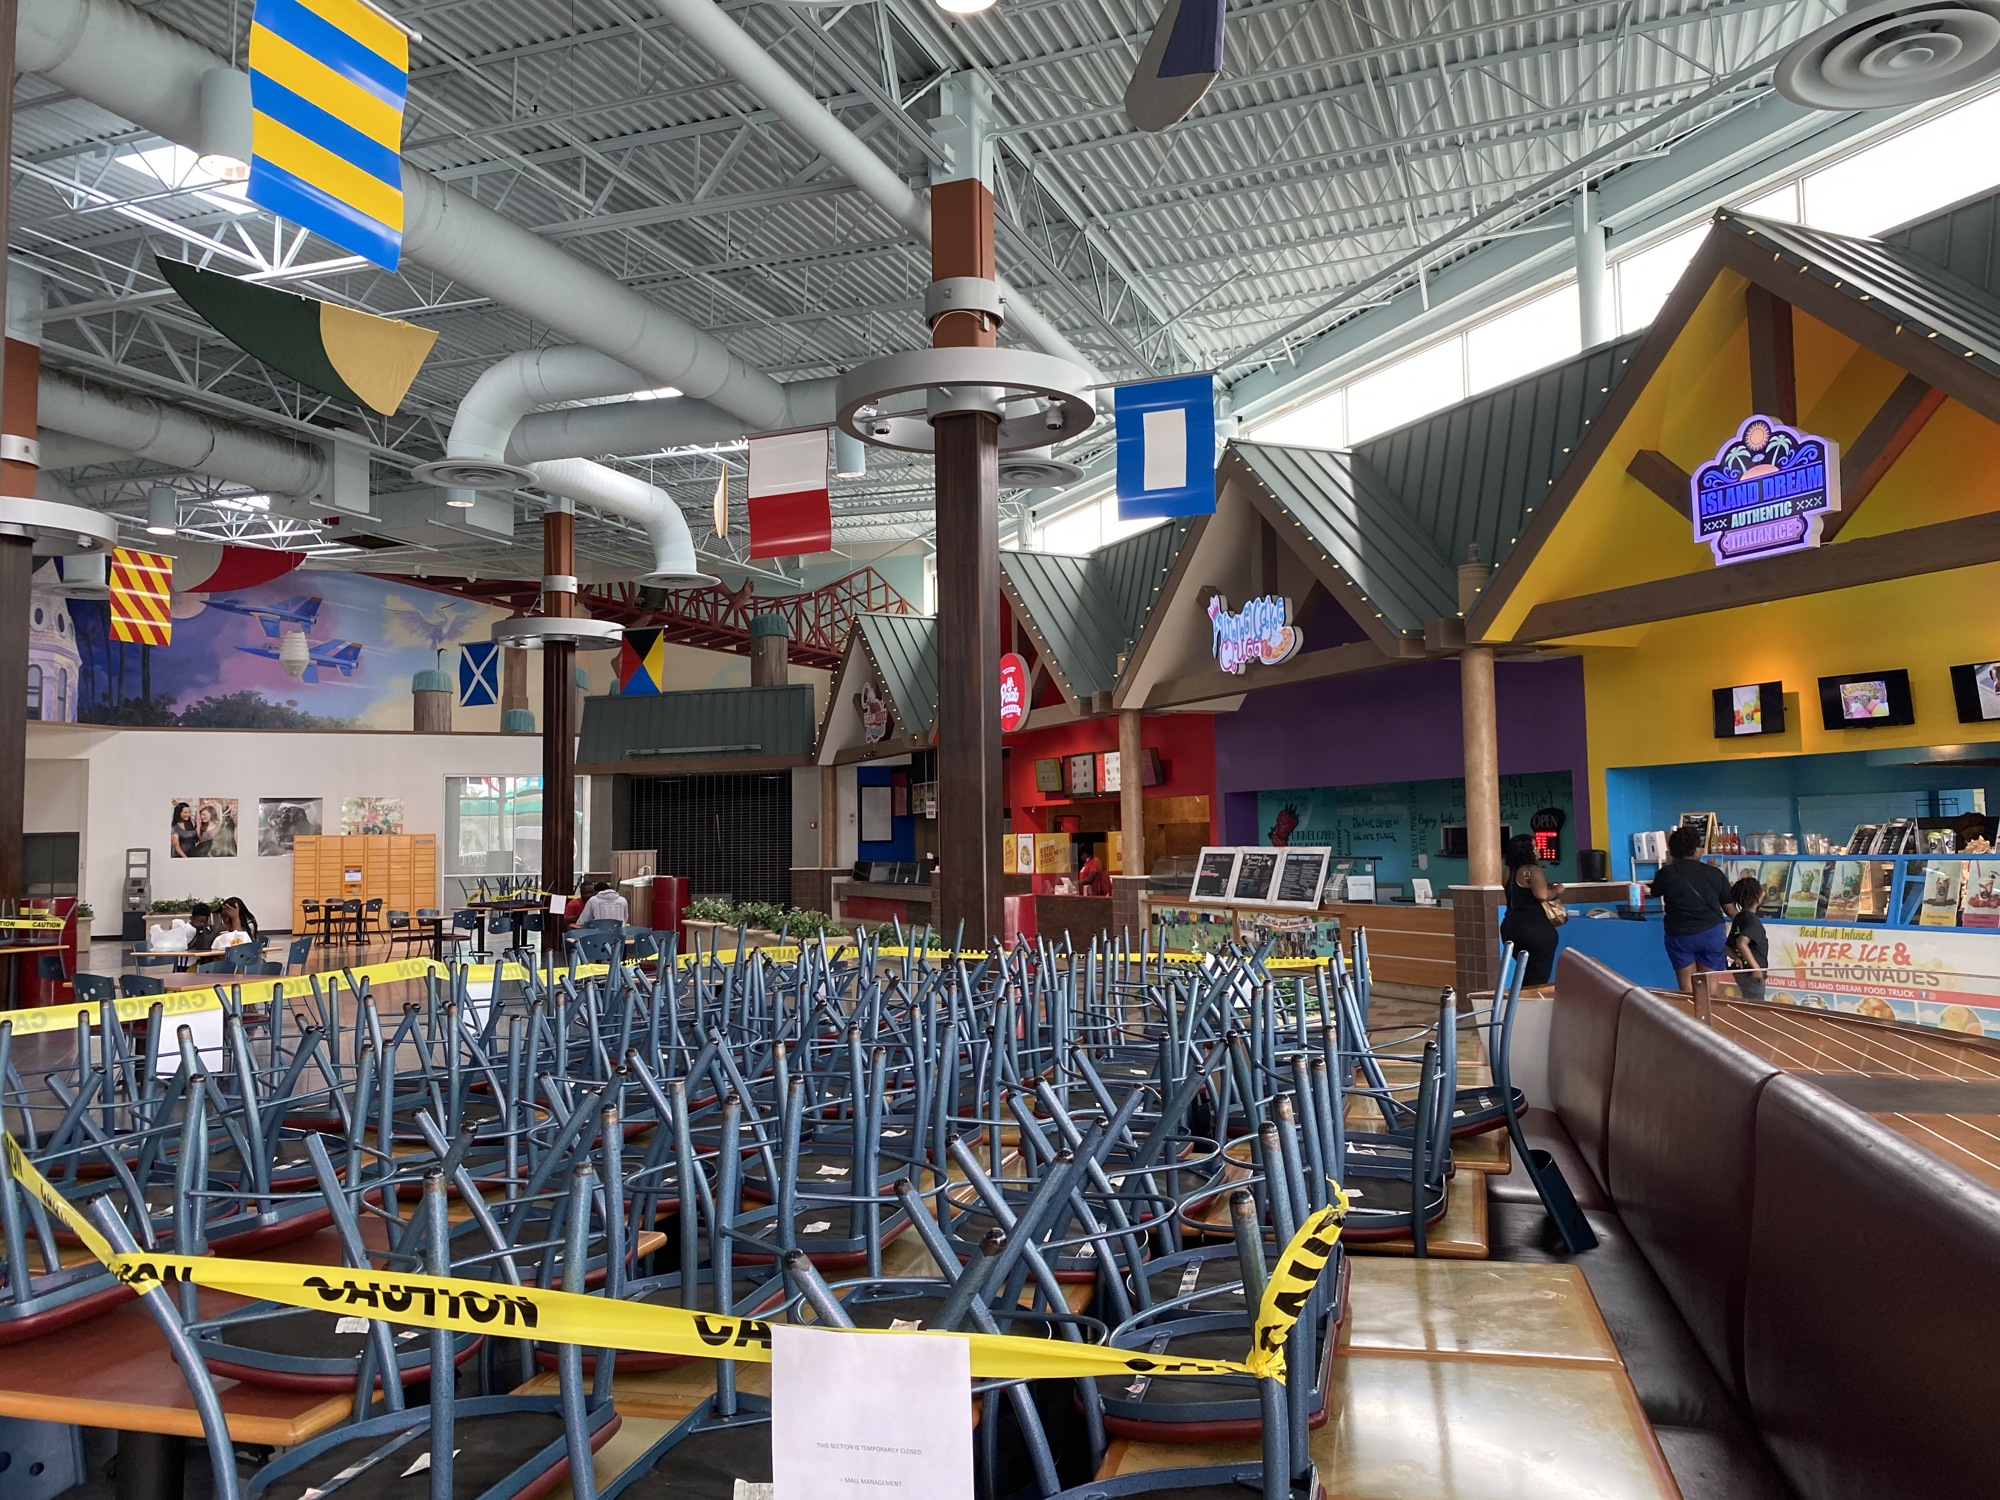 The food court at Regency Square Mall is open, but chairs are stacked to encourage social distancing because of COVID-19.